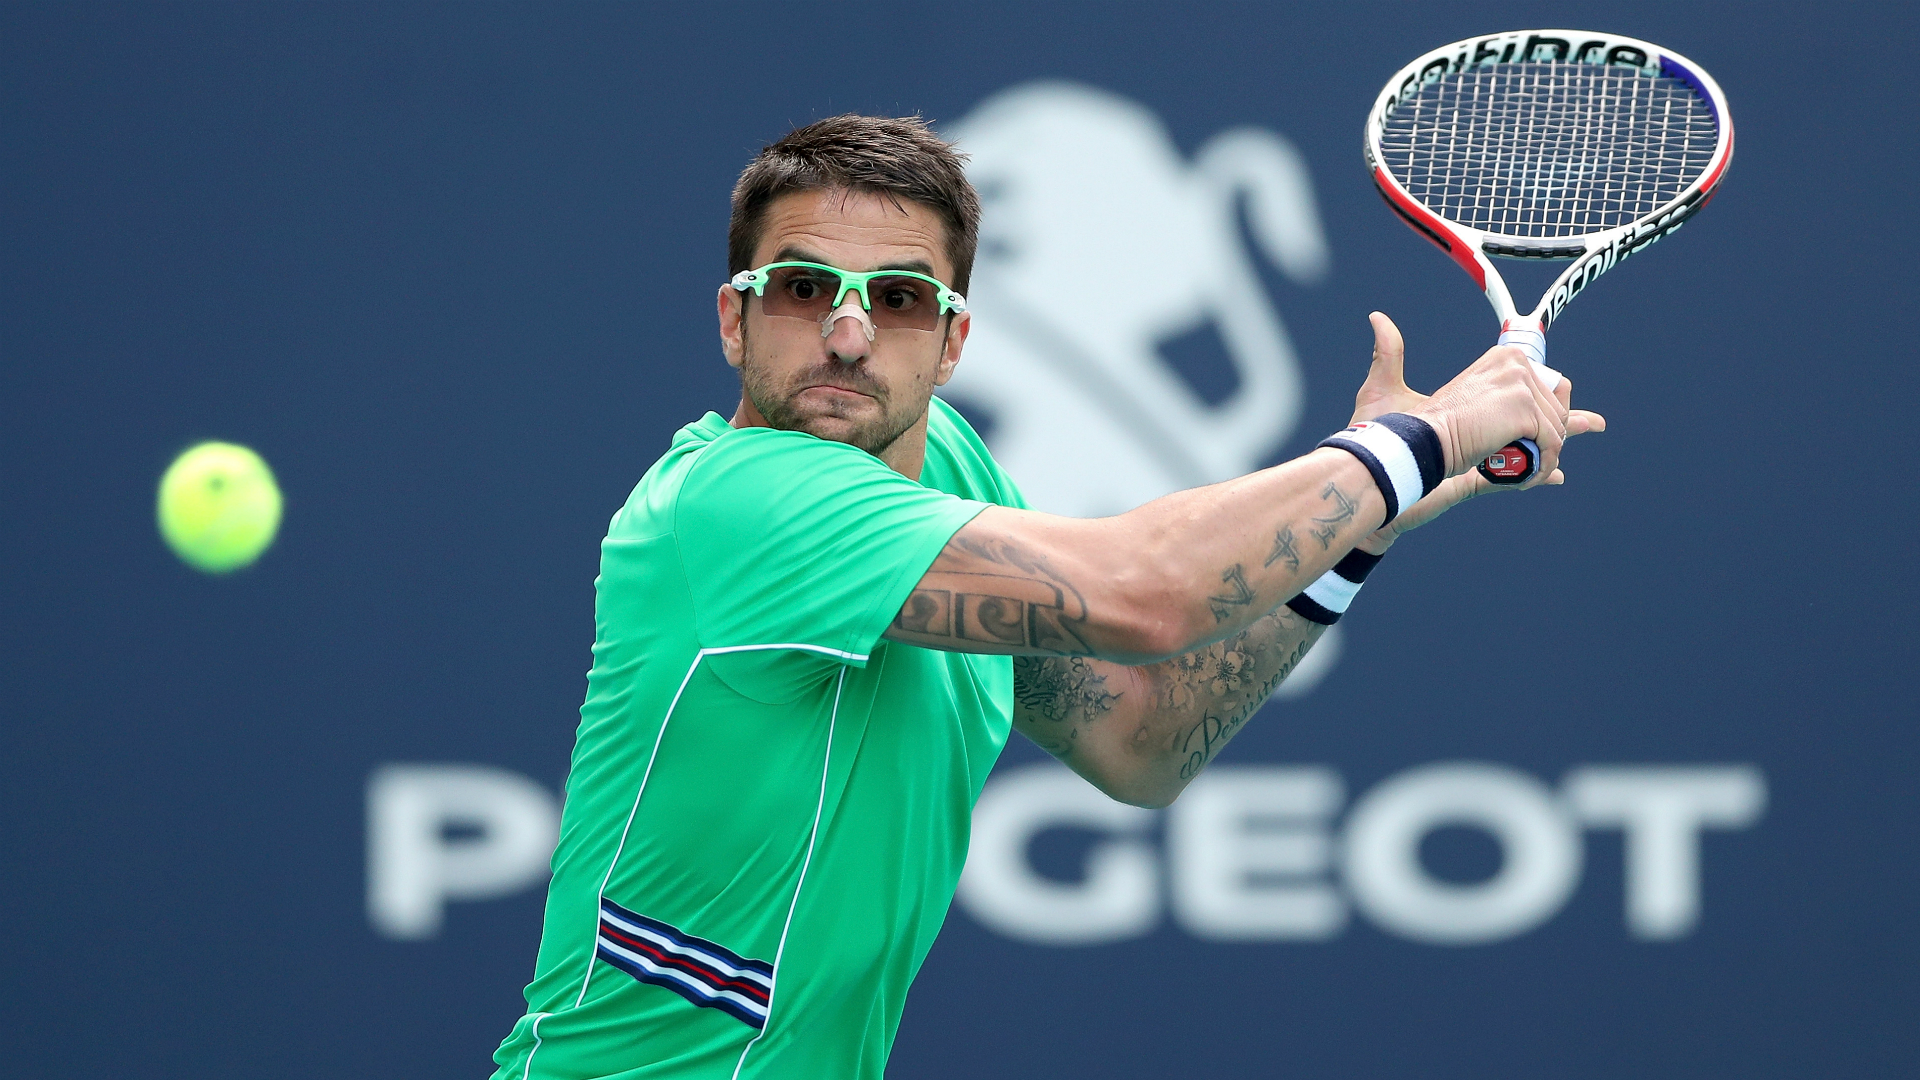 Janko Tipsarevic saw off world number 93 Bradley Klahn in straight sets on Wednesday for his first tour-level victory since August 2017.